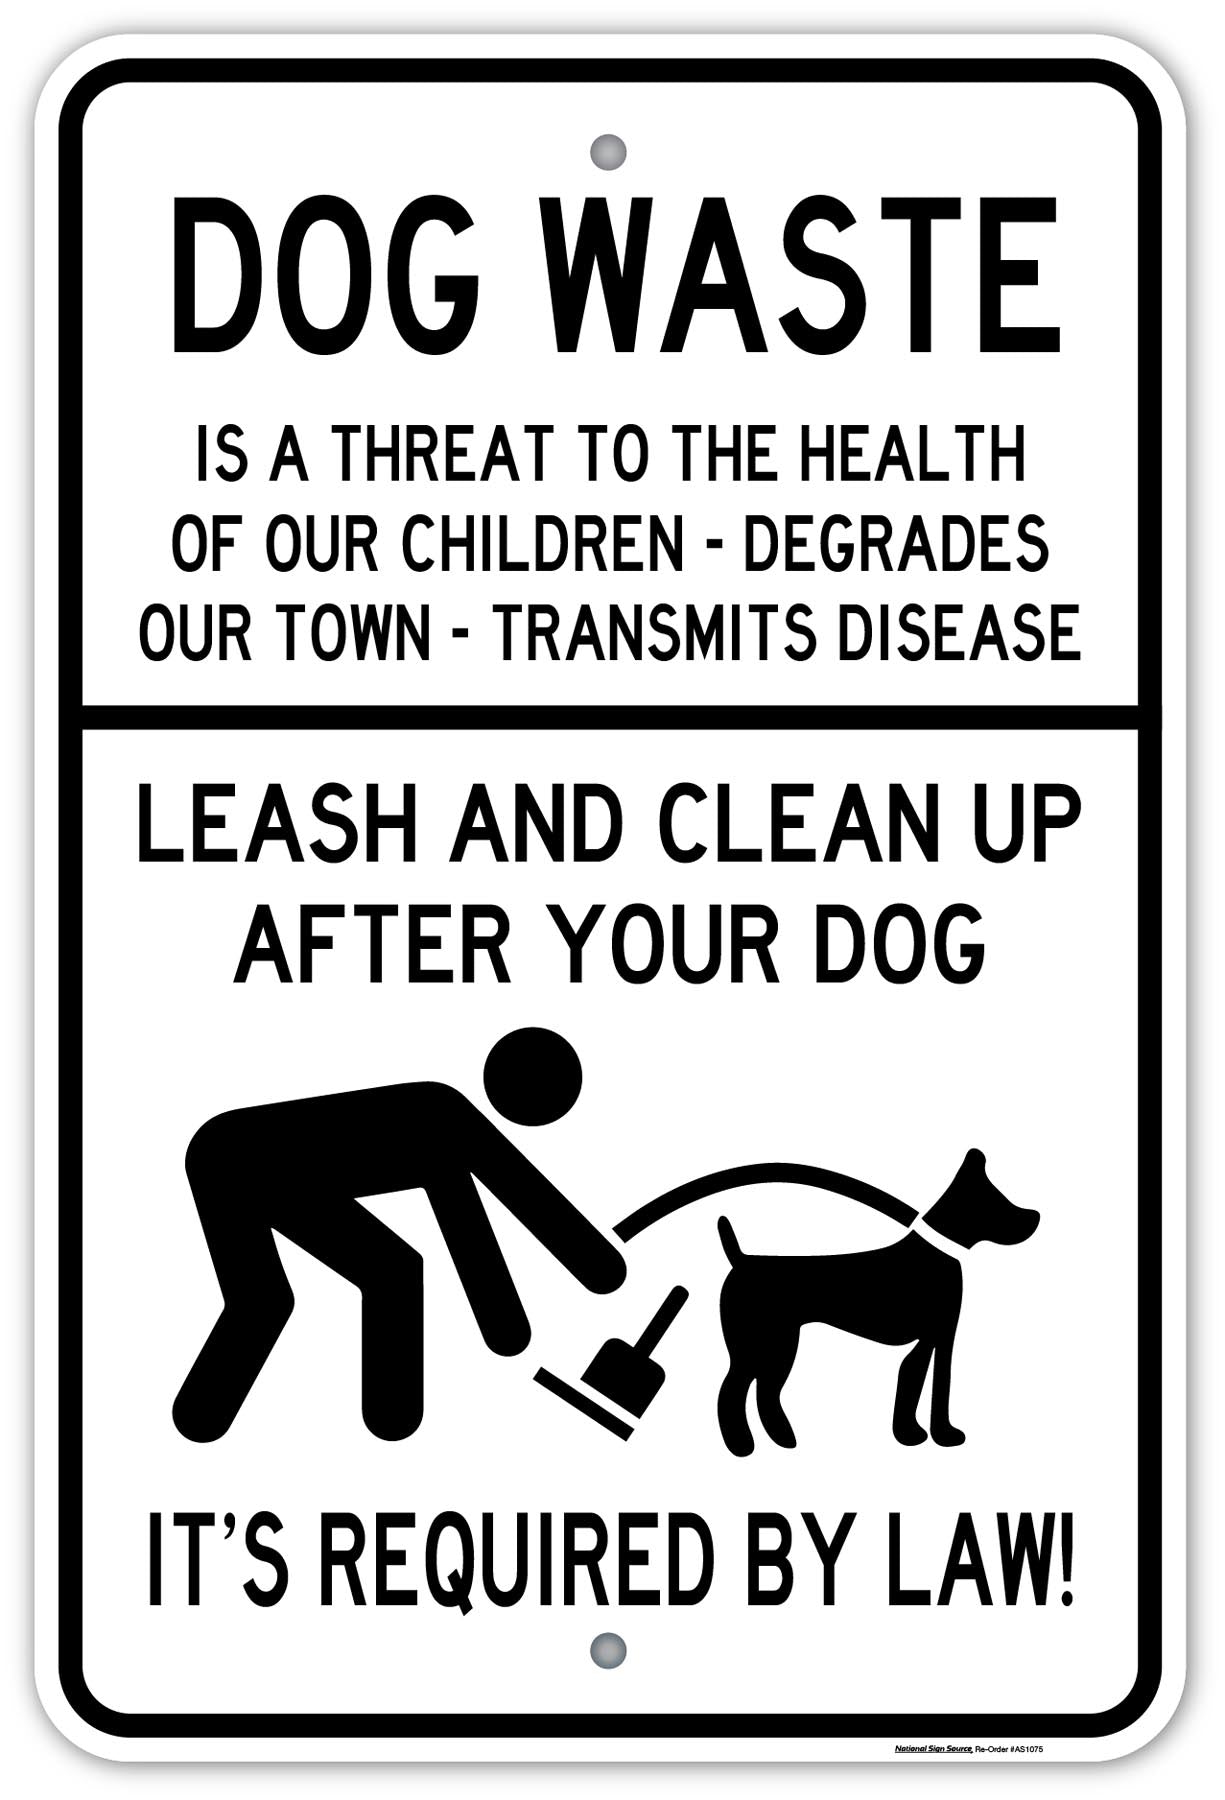 Dog Waste Sign. Aluminum Sign Reads, "Dog waste is a threat to the health of our children degrades our town transmits disease. Leash and clean up after your dog, It's required by law!"